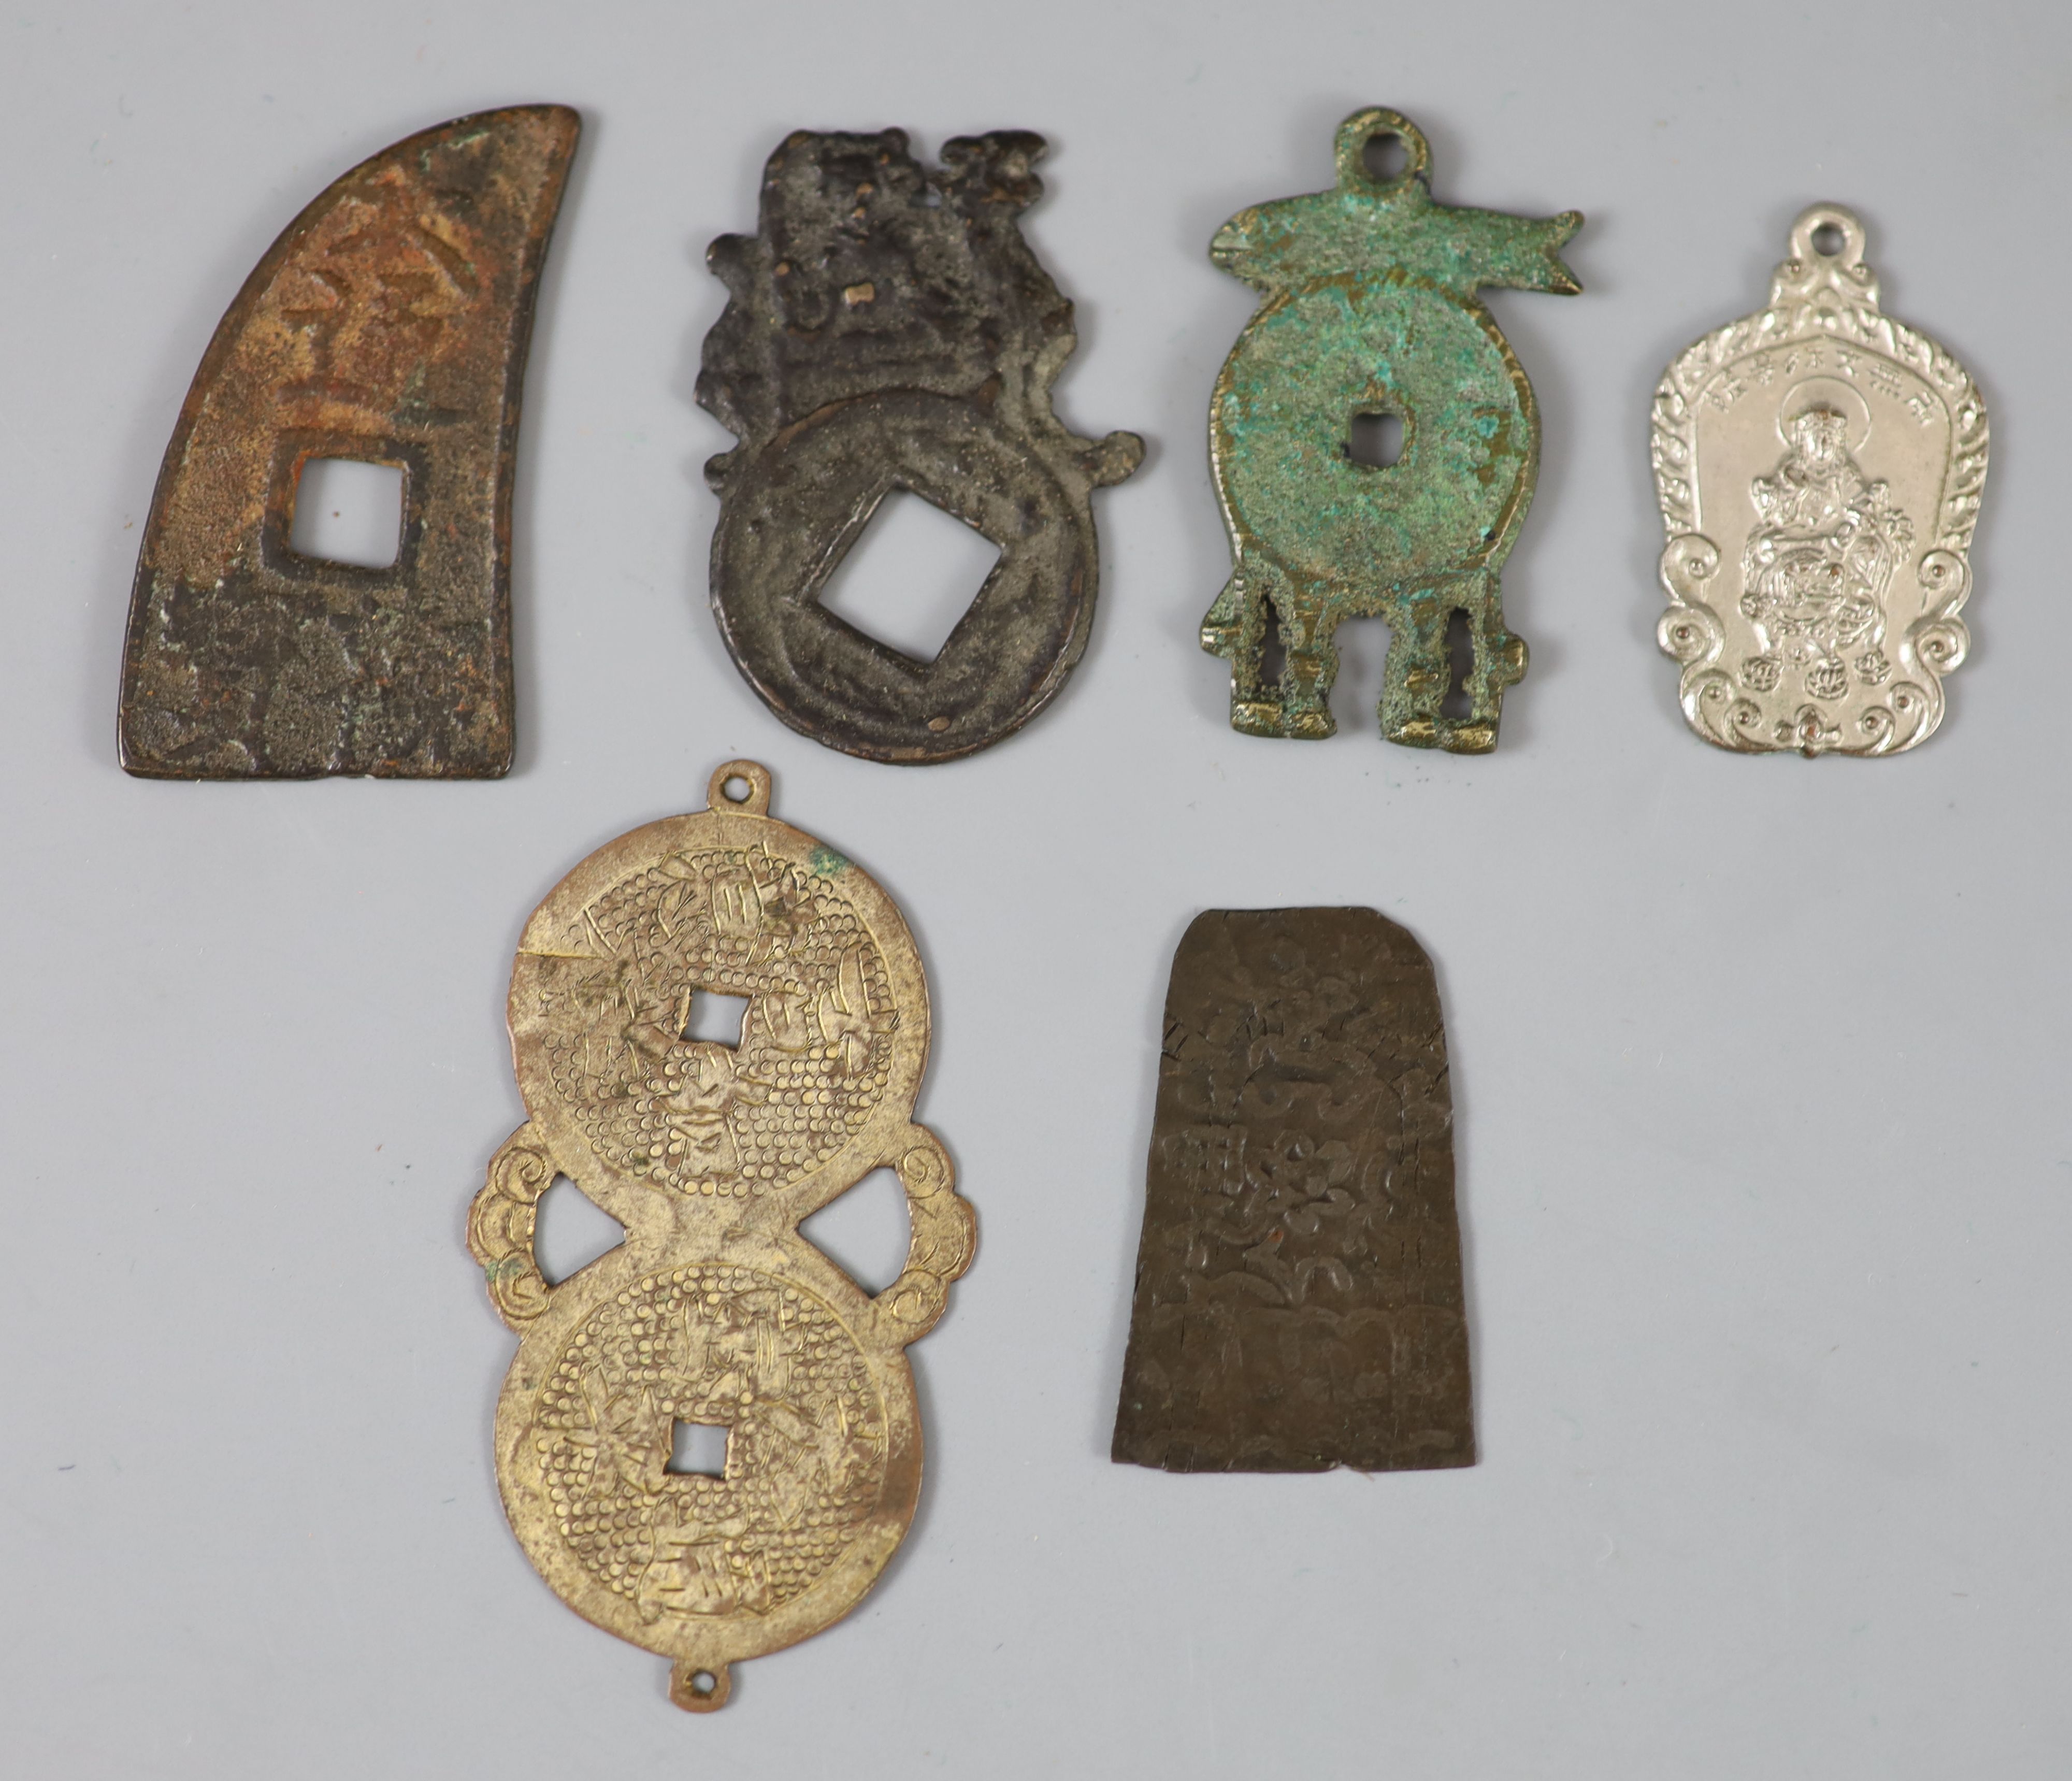 China, 5 bronze or white metal charms or amulets, Qing dynasty,